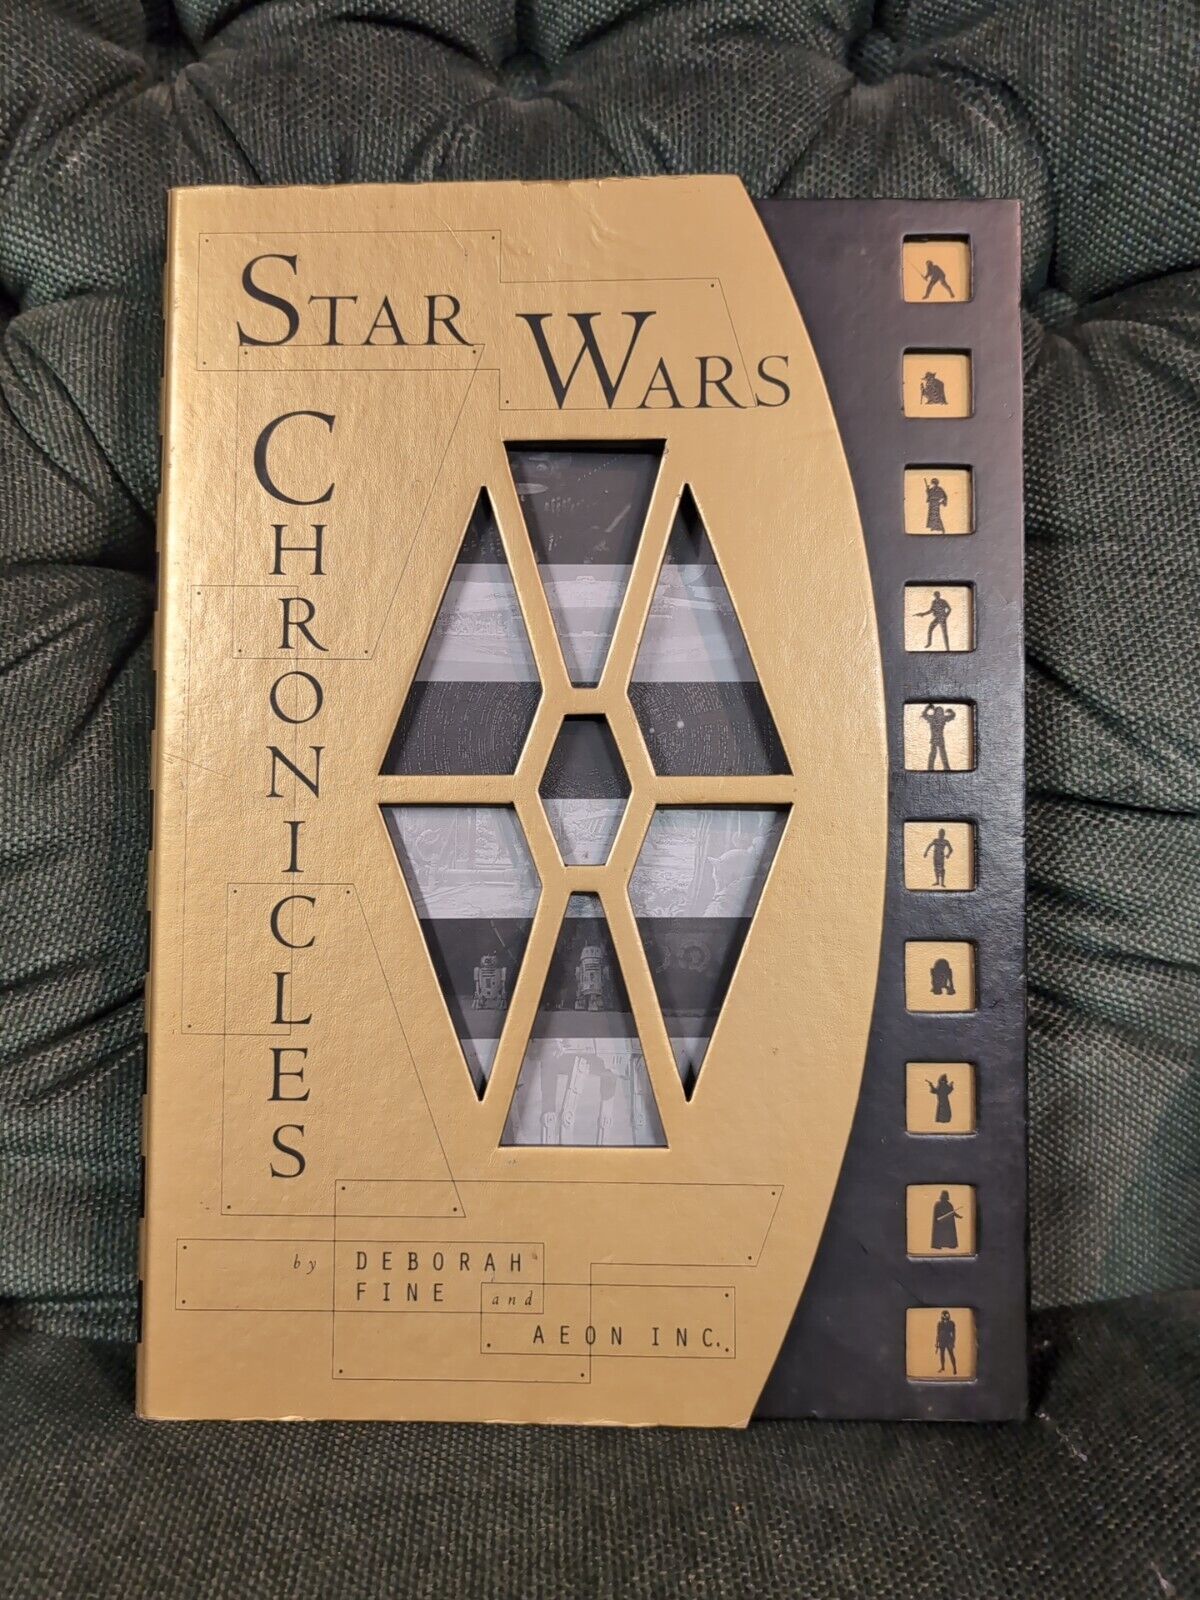 STAR WARS CHRONICLES BOOK. 1997 1st Edition. Vintage. Very rare collectible.